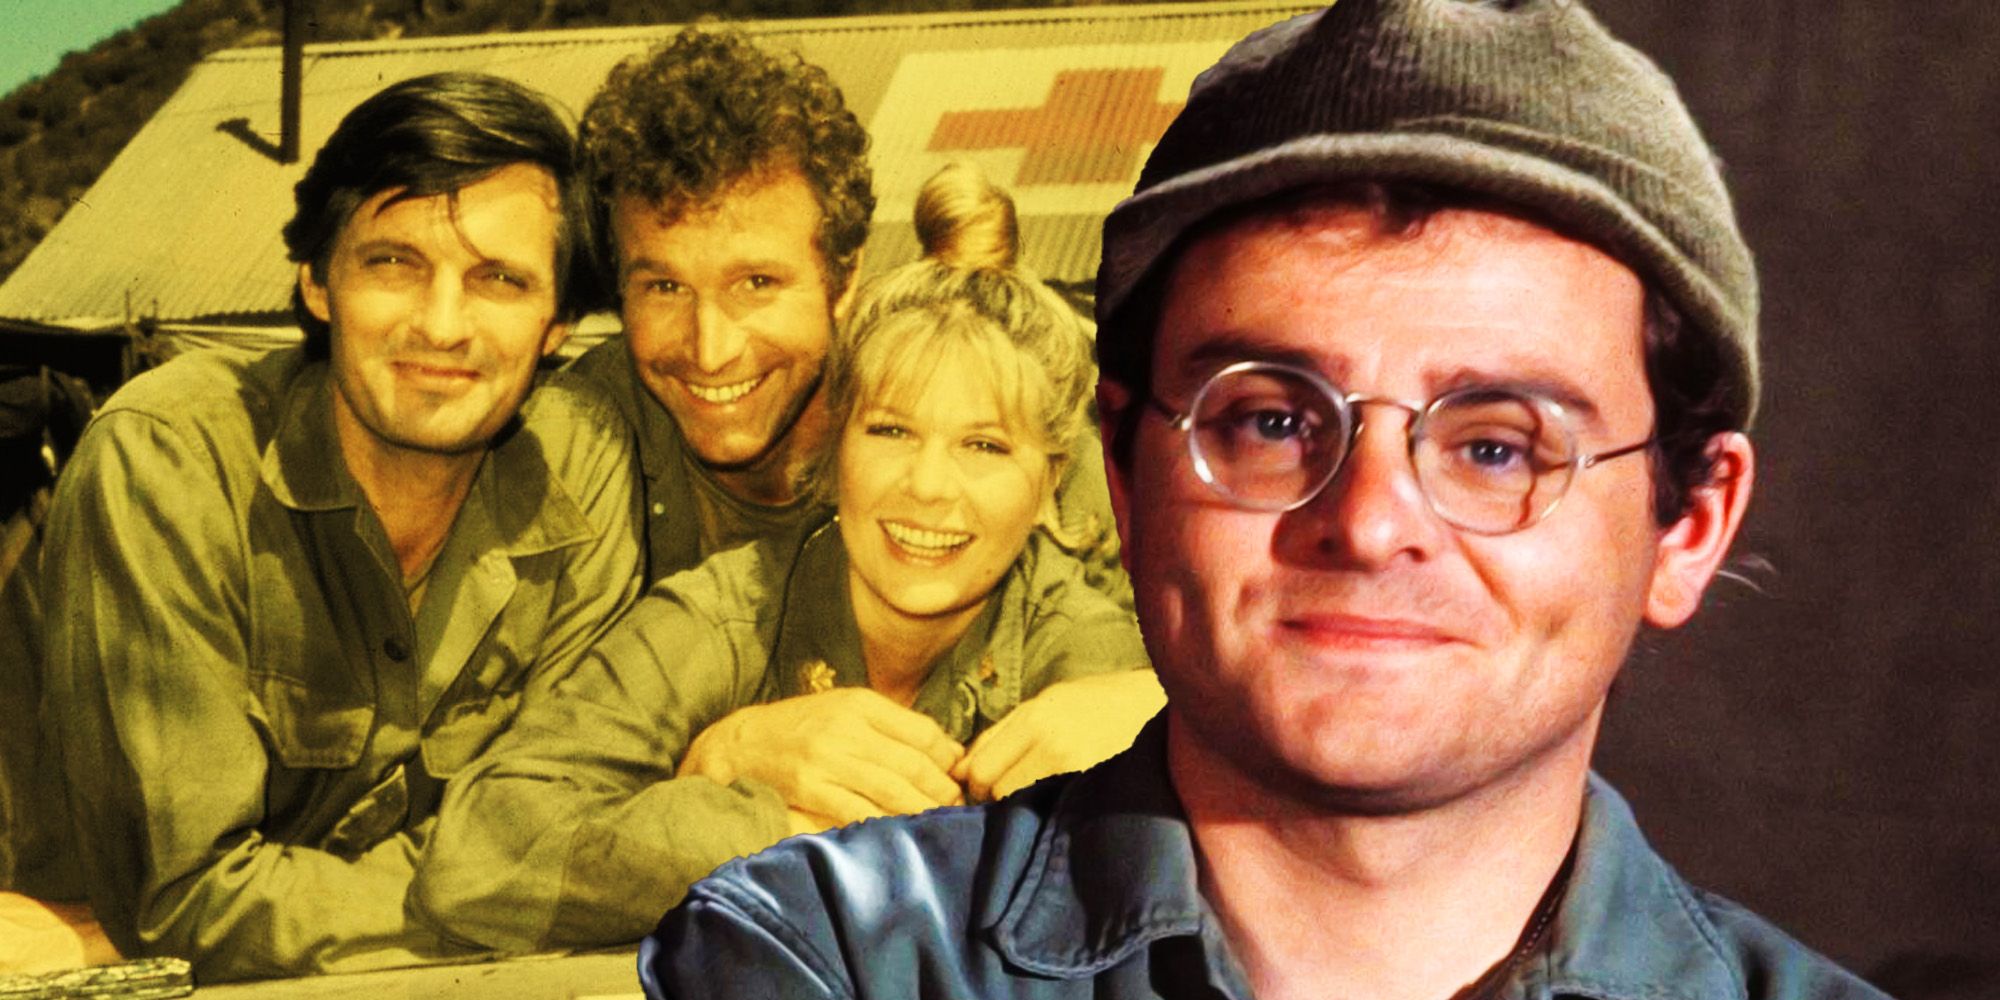 A blended image features three MASH cast members posing for a photo in the background with Gary Burghoff as Radar in the foreground